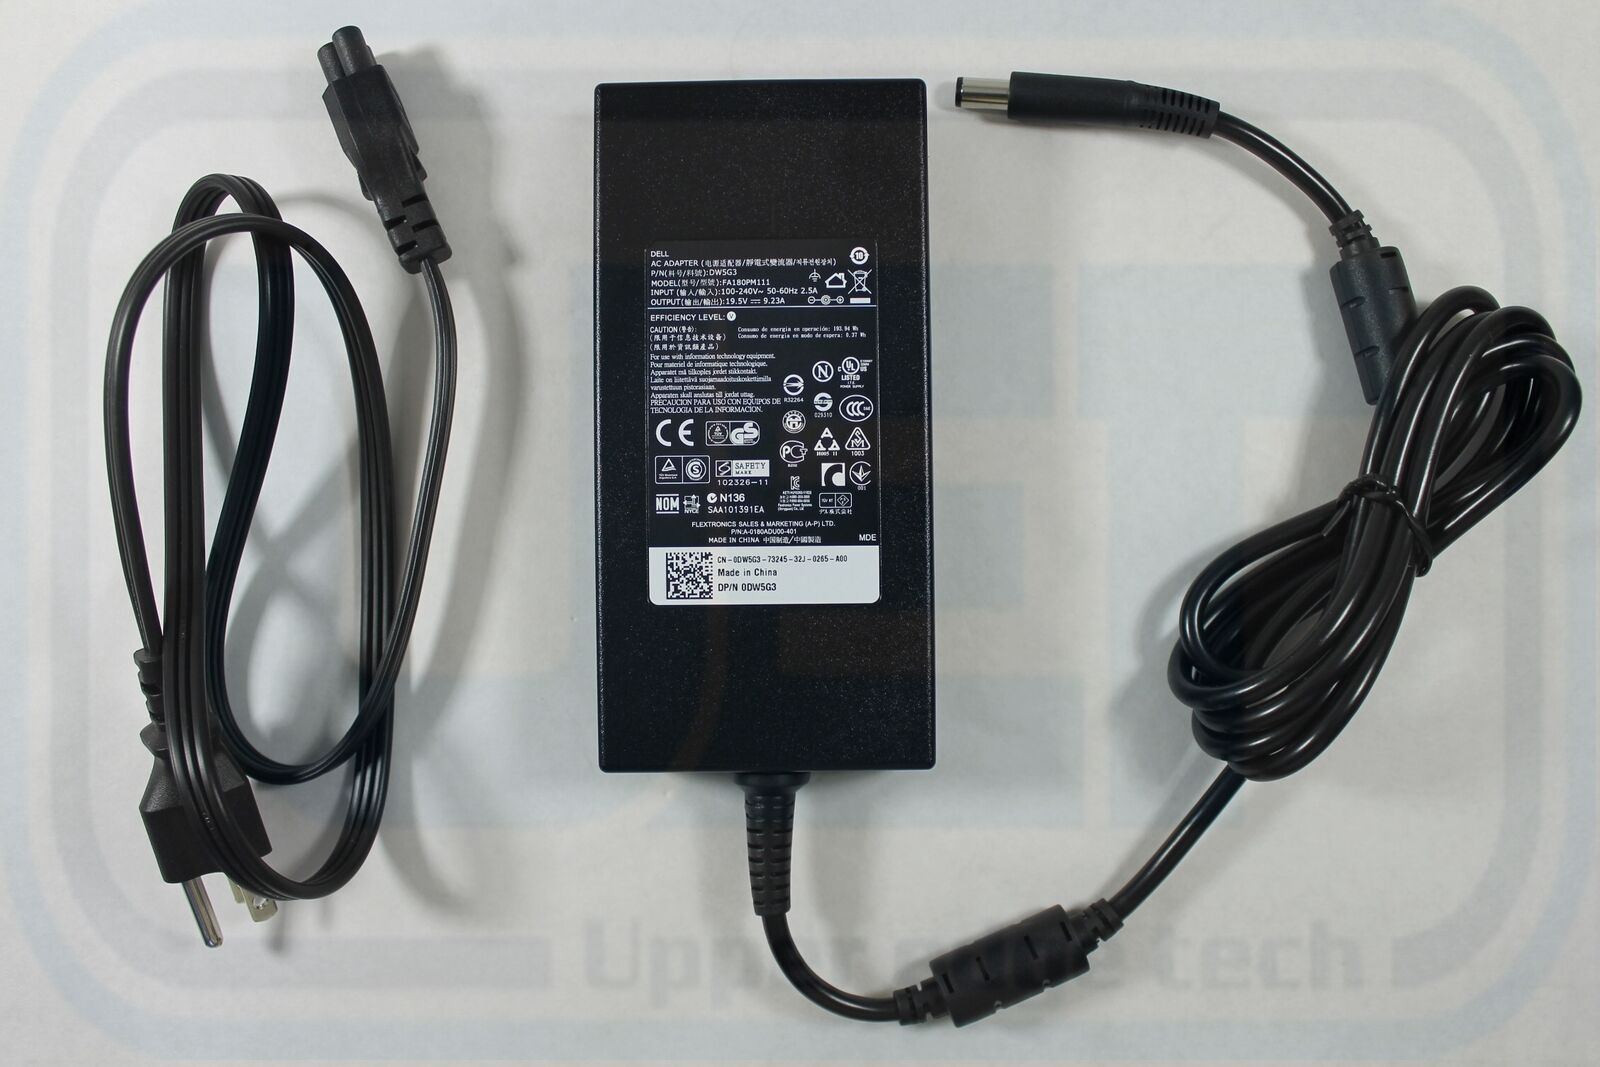 Dell Precision M4700 M6500 M4600 M6600 AC Power Adapter DW5G3 180W Large Round